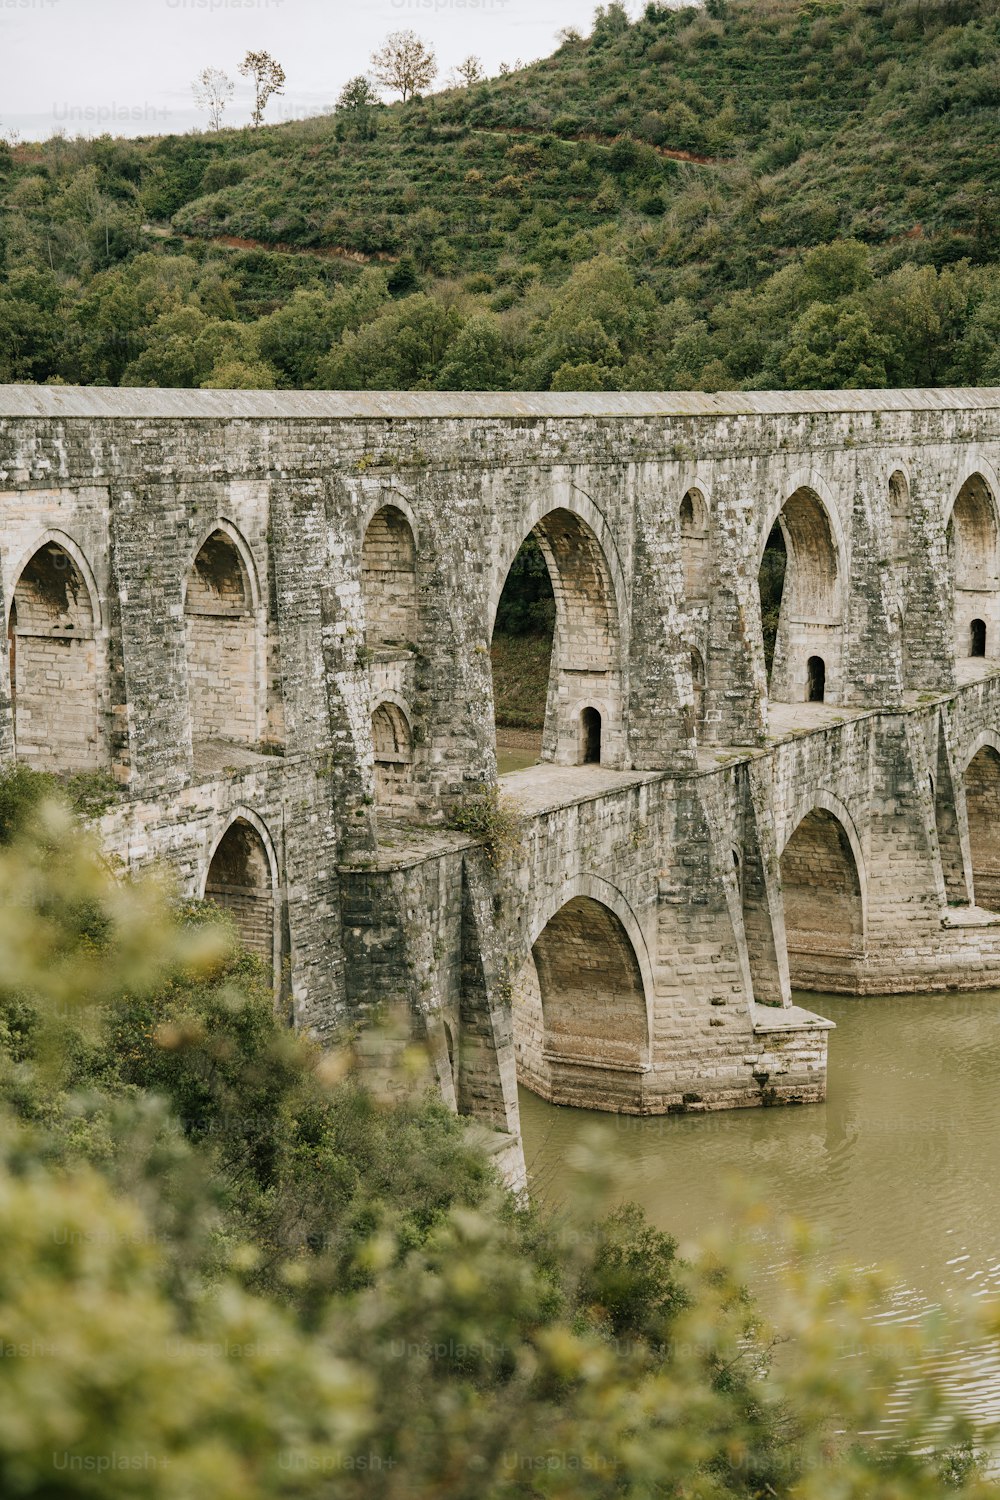 a large stone bridge spanning over a river